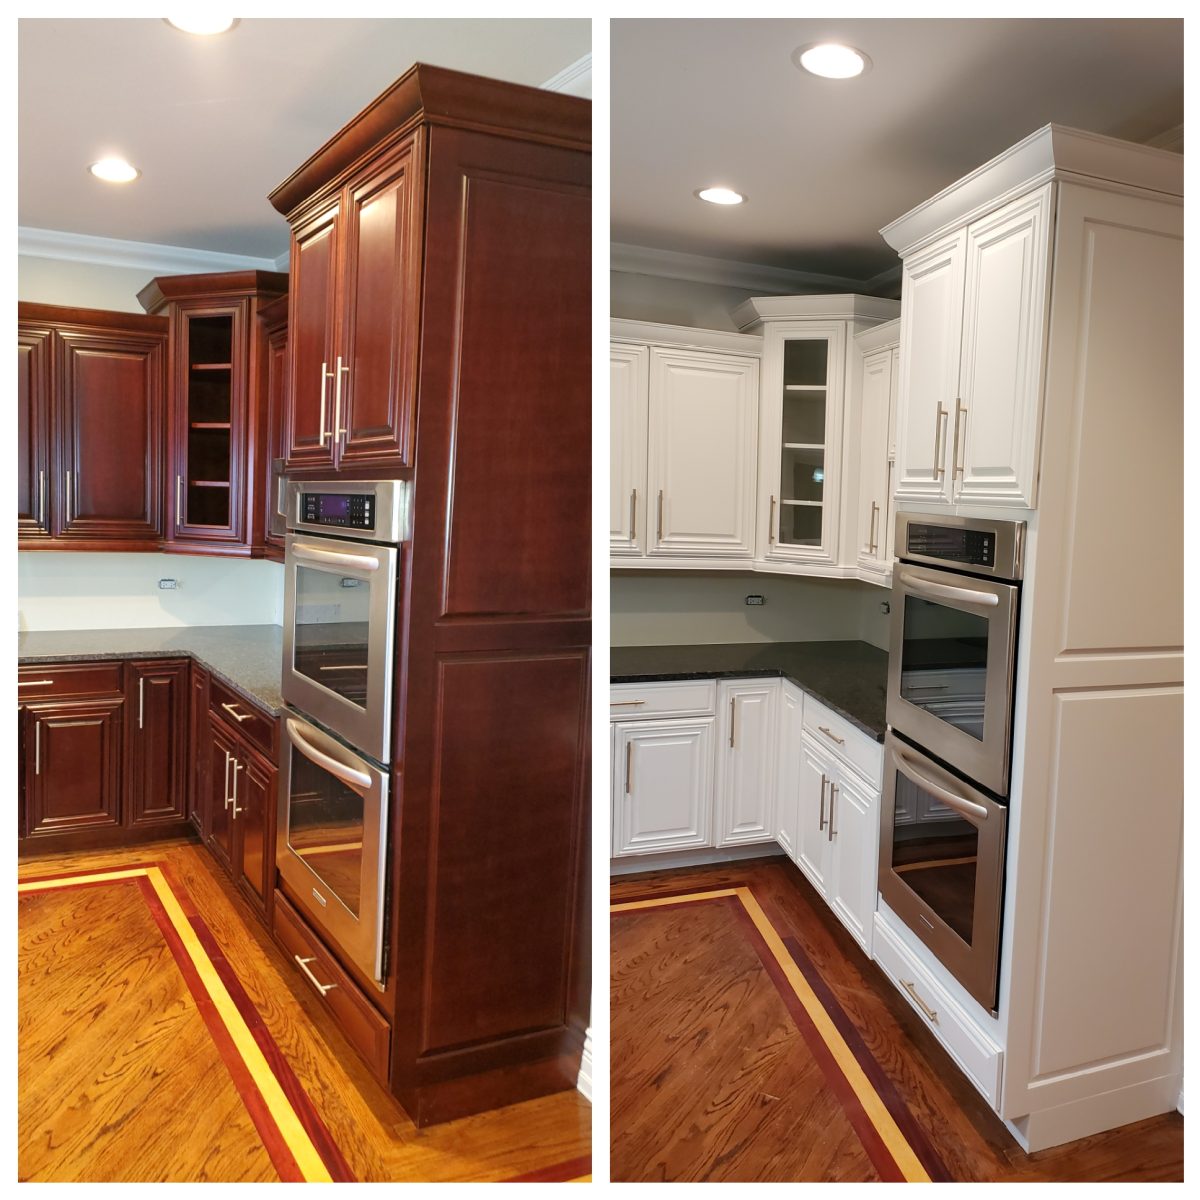 Tips For Painting Cherry Cabinets White, Can Cherry Wood Cabinets Be Painted